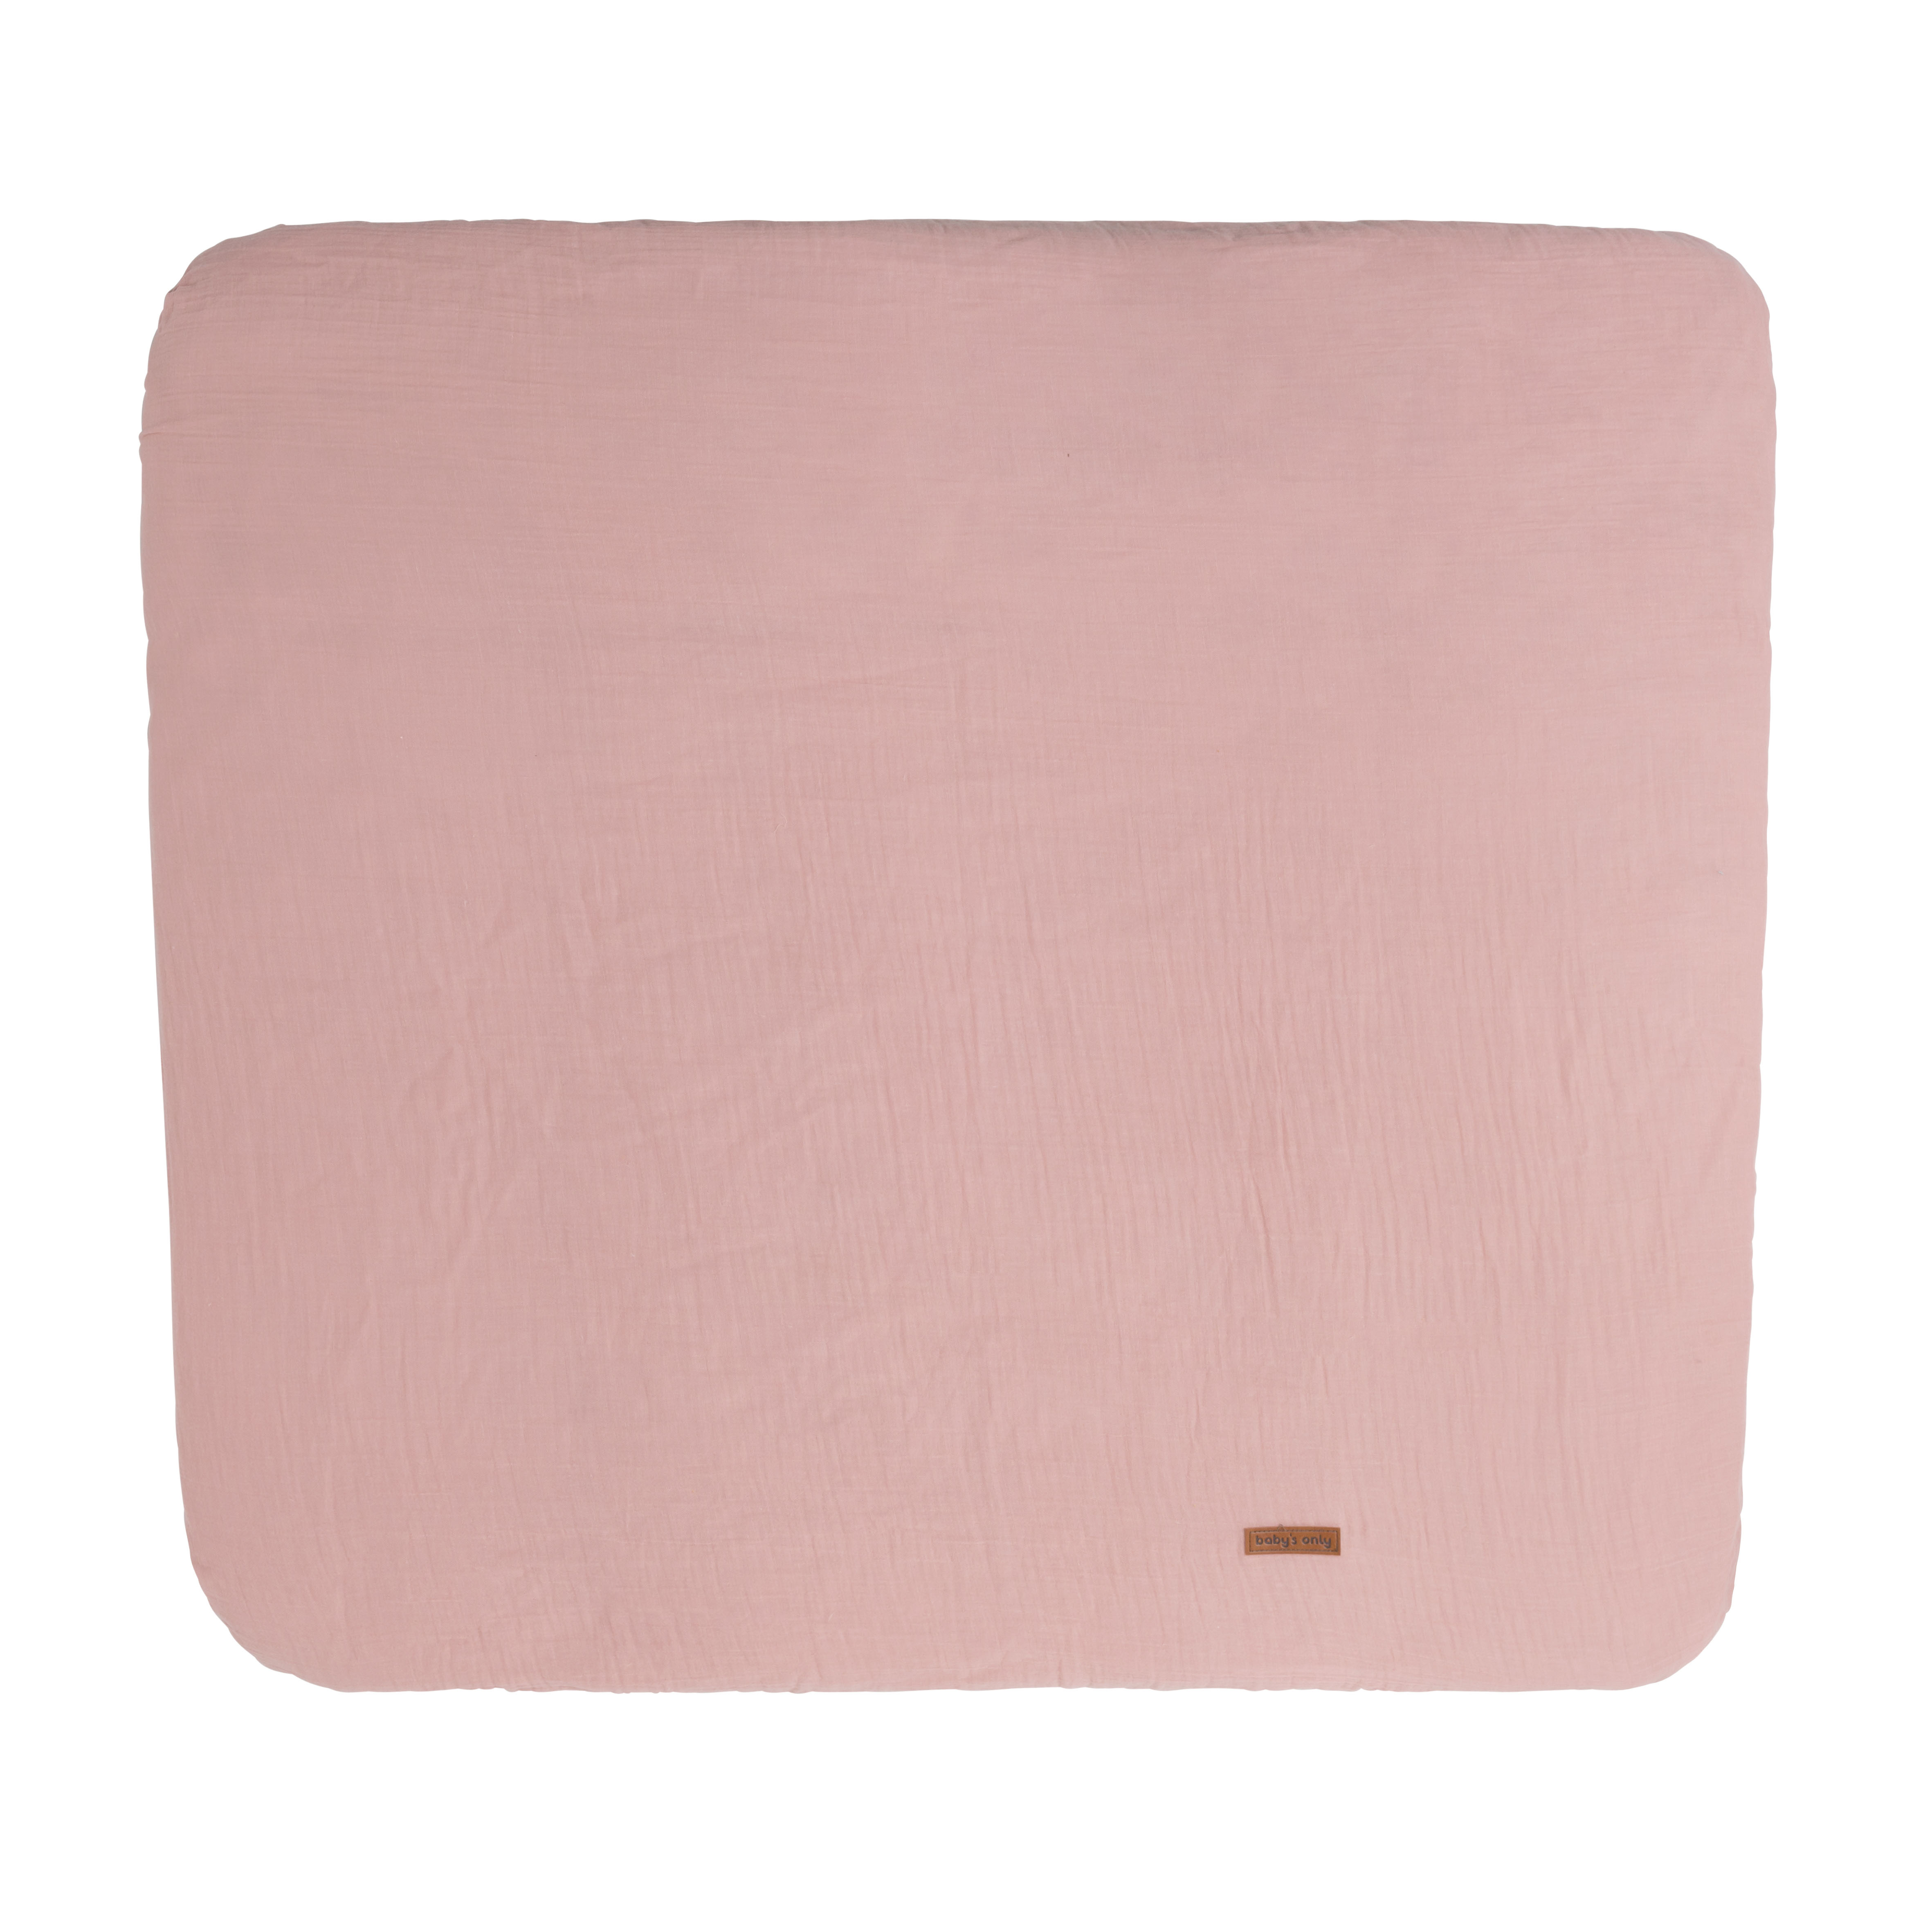 Changing pad cover Breeze old pink - 75x85